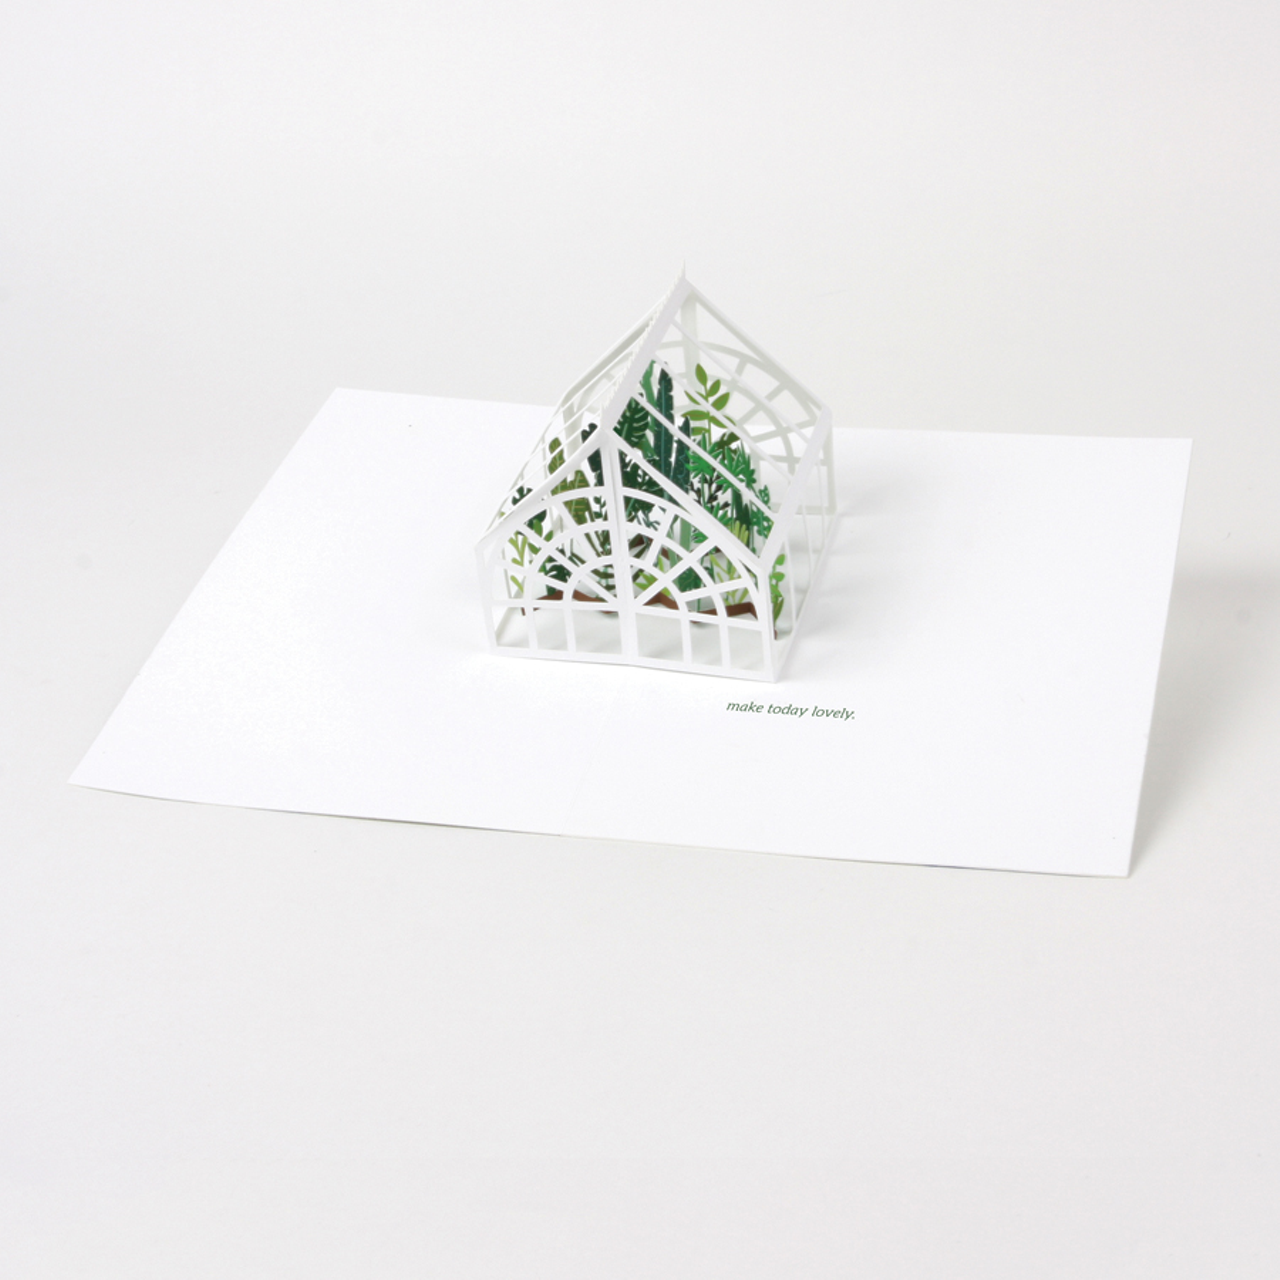 Laser cut leaves are nestled inside a cut greenhouse in this card.